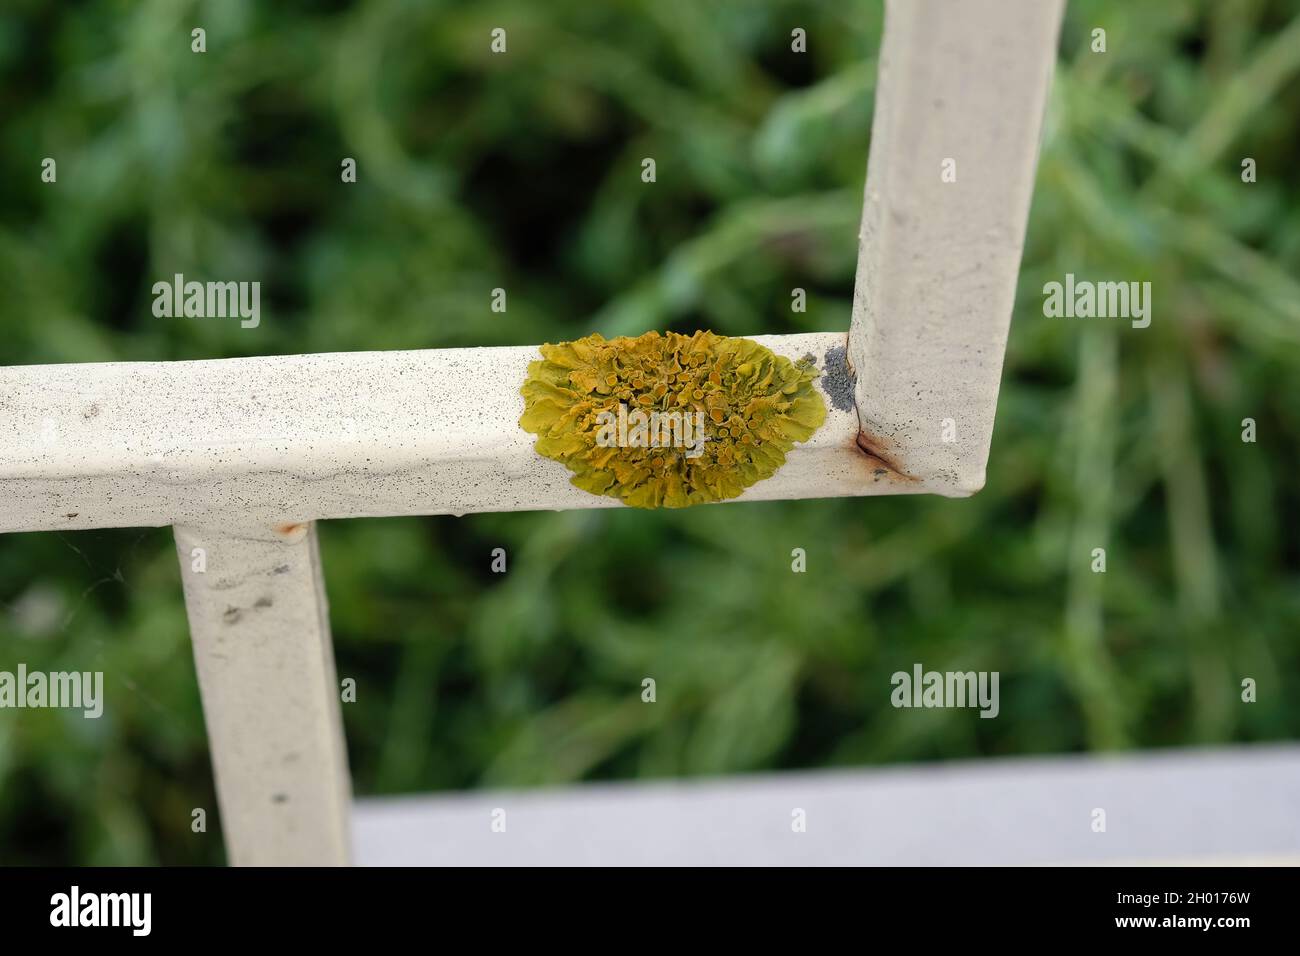 Fungus on a metal fence in the yard. Schimmelpilz on an iron surface. Fight mold on smooth surfaces. Stock Photo